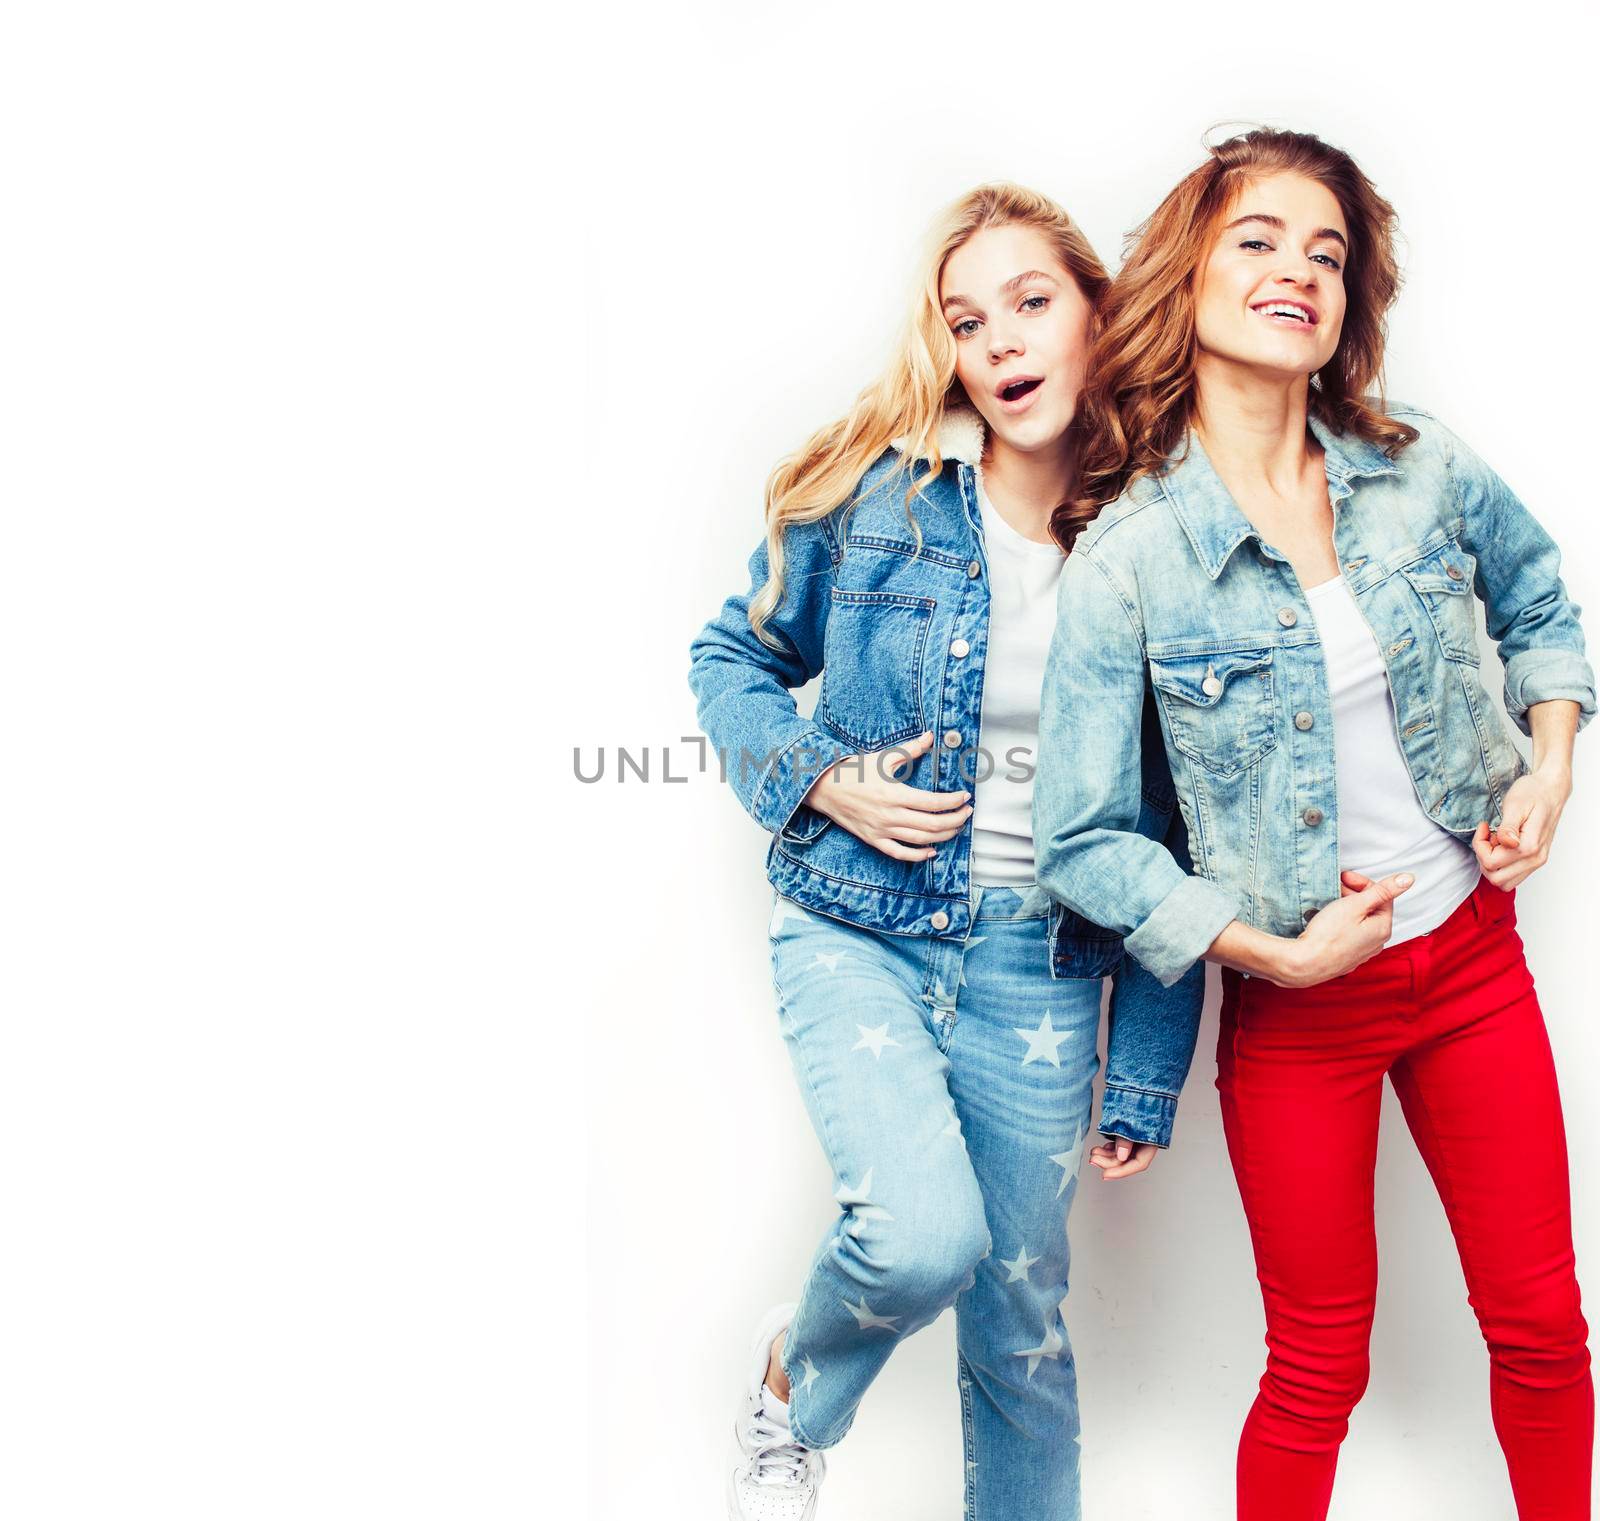 best friends teenage girls together having fun, posing emotional on white background, besties happy smiling, lifestyle people concept close up.